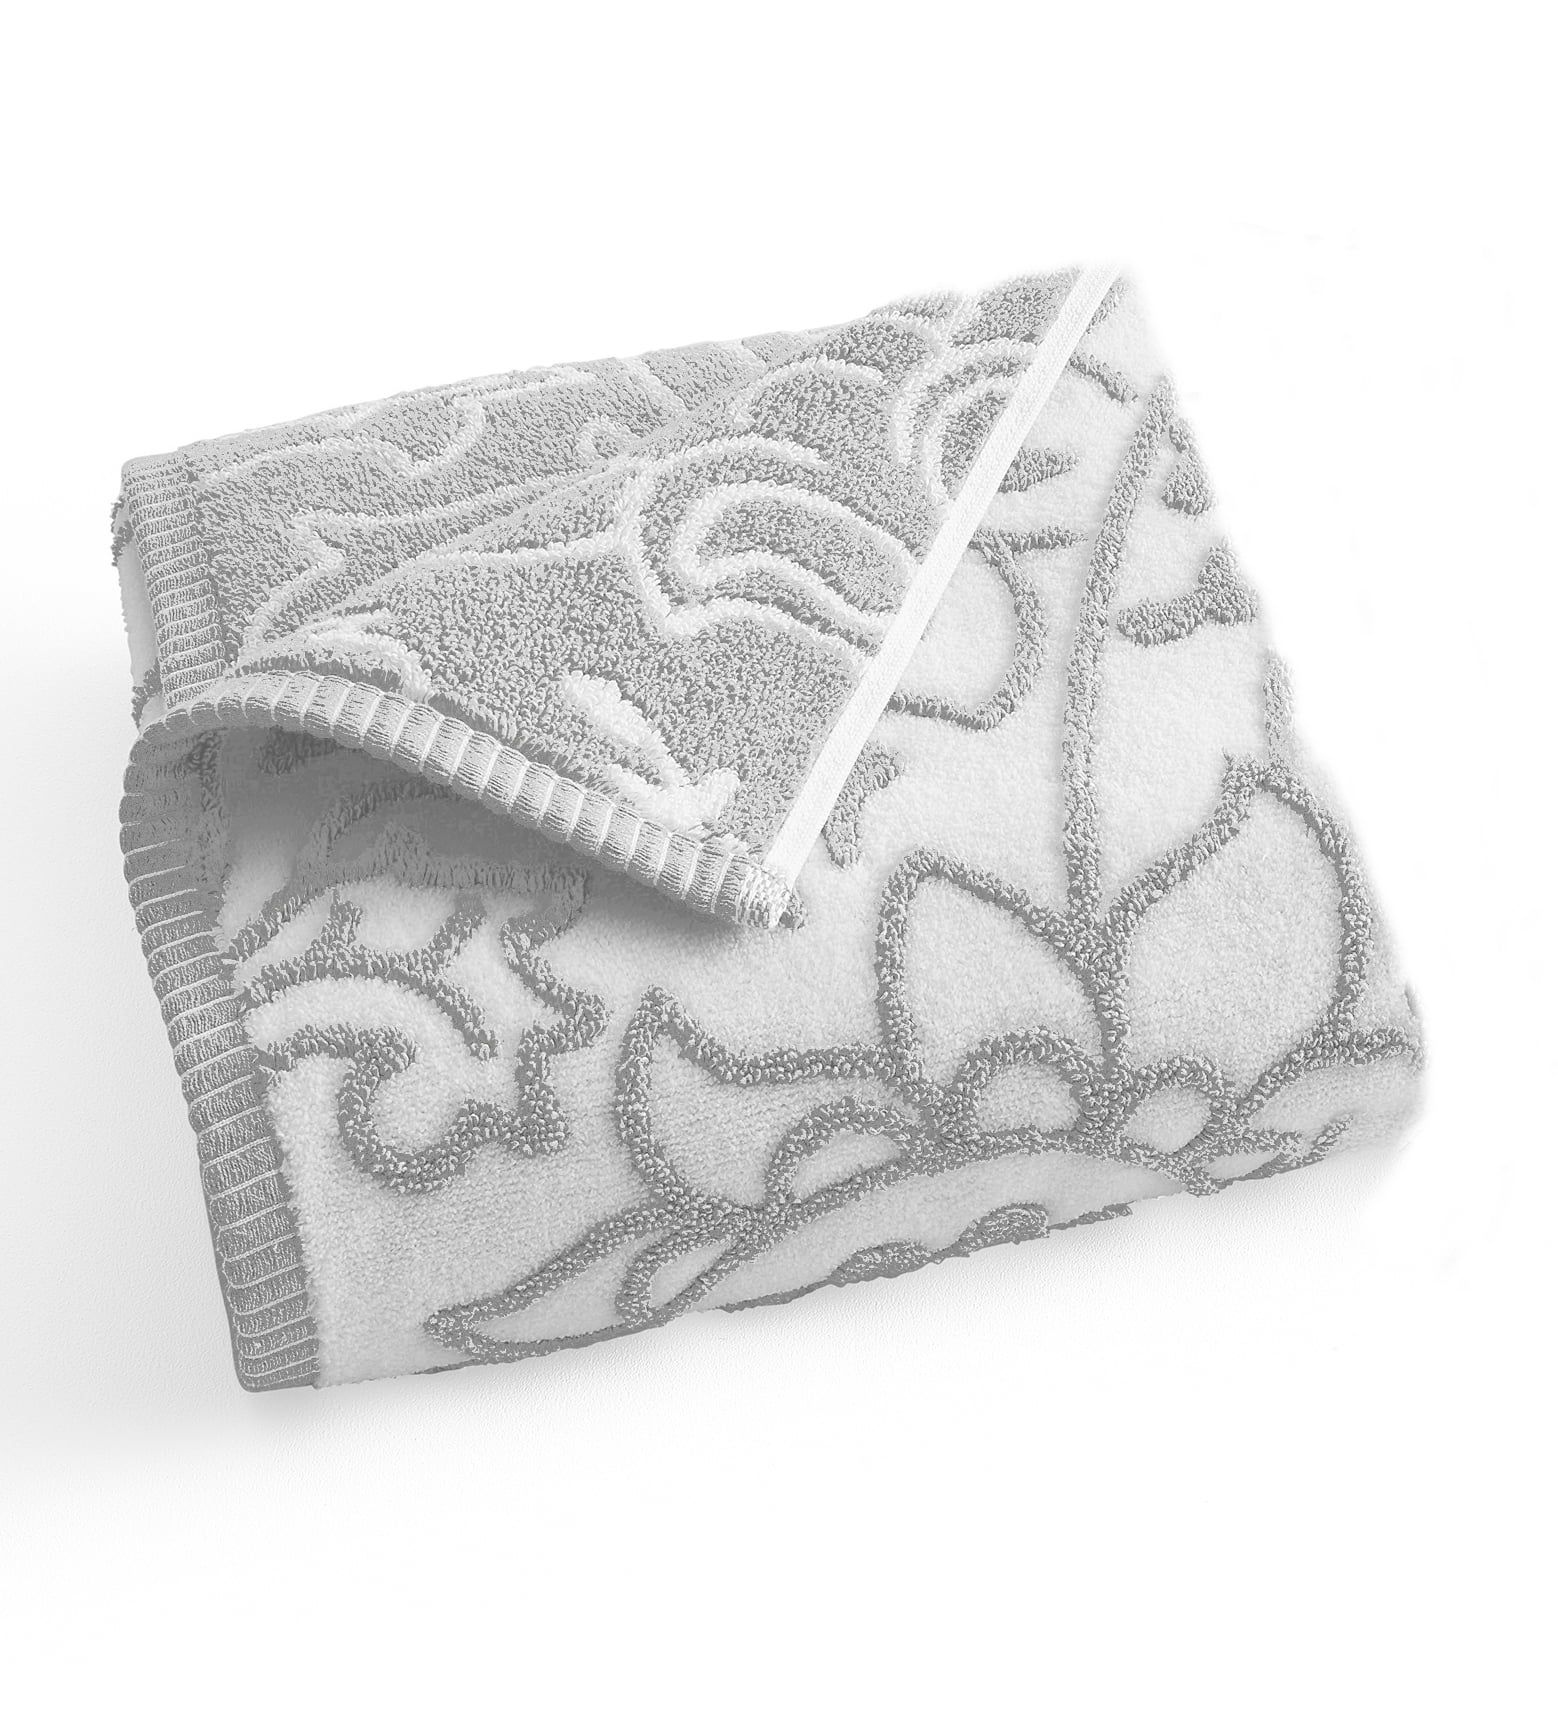 Soft Silver Hand Towel, Sheared Paisley, Better Homes & Gardens Towel Collection | Walmart (US)